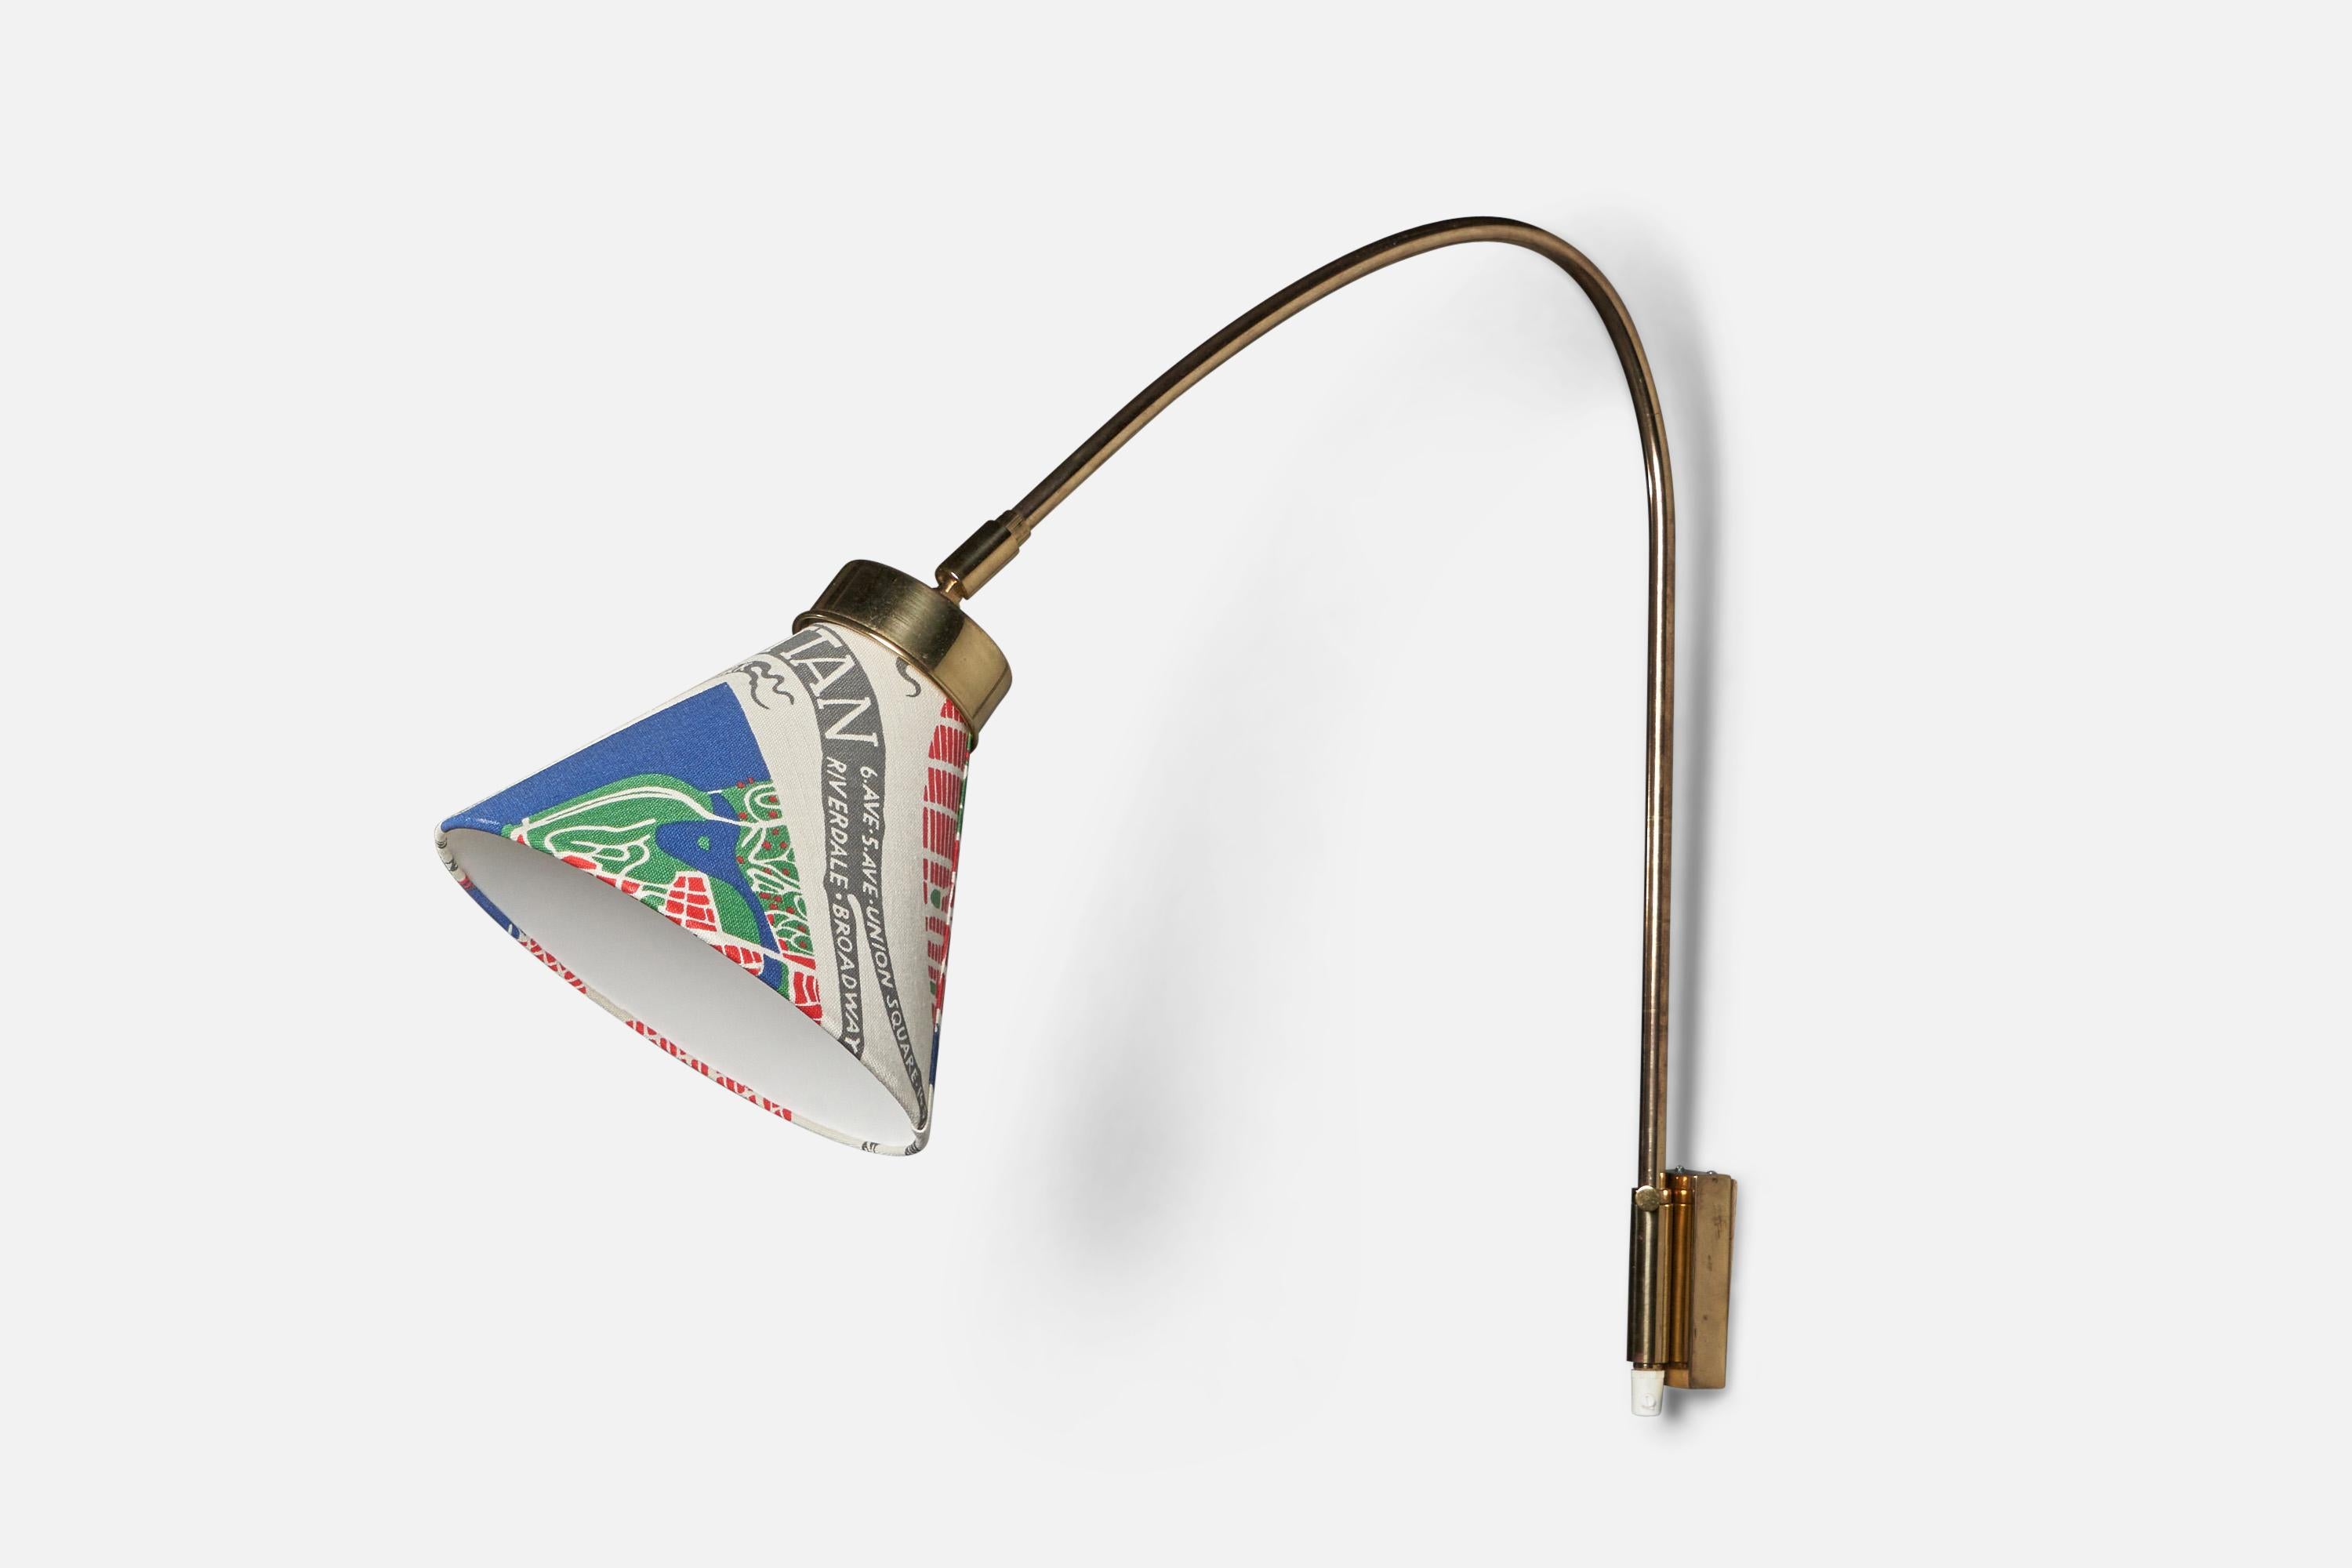 An adjustable brass and pattern-printed fabric wall light designed by Josef Frank and produced by Svenskt Tenn, Sweden, c. 1950s.

Plug in with cord feeding from bottom of stem. Not convertible to hard wire.

Overall Dimensions (inches): 21.5 H x